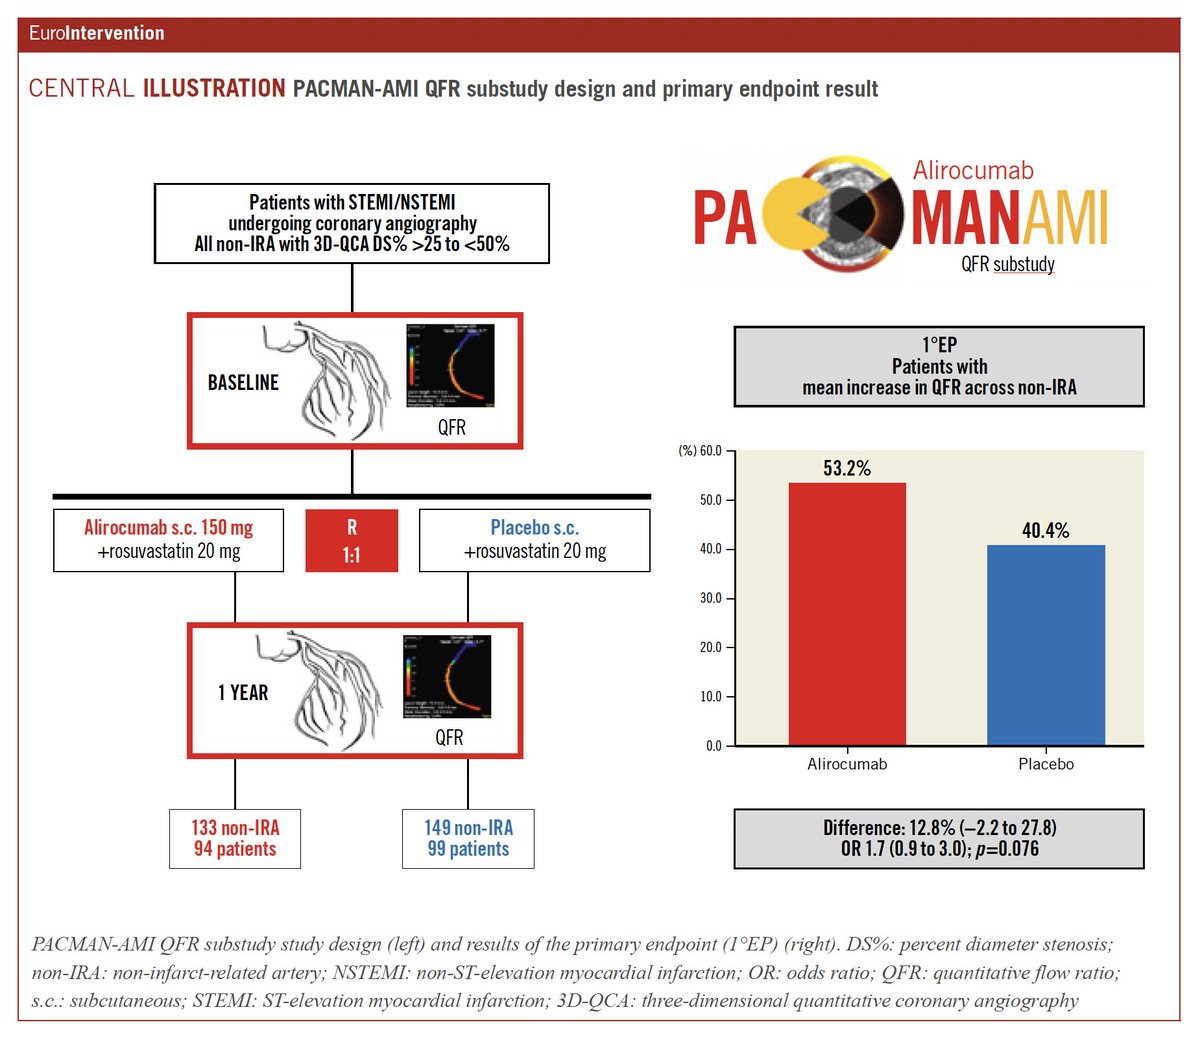 In PACMAN-AMI, the PCSK9i alirocumab led to significant regression of non-obstructive lesions at 1 year compared to placebo on top of rosuvastatin. New research shows that this effect did not translate into significant improvement in coronary physiology. eurointervention.pcronline.com/article/impact…